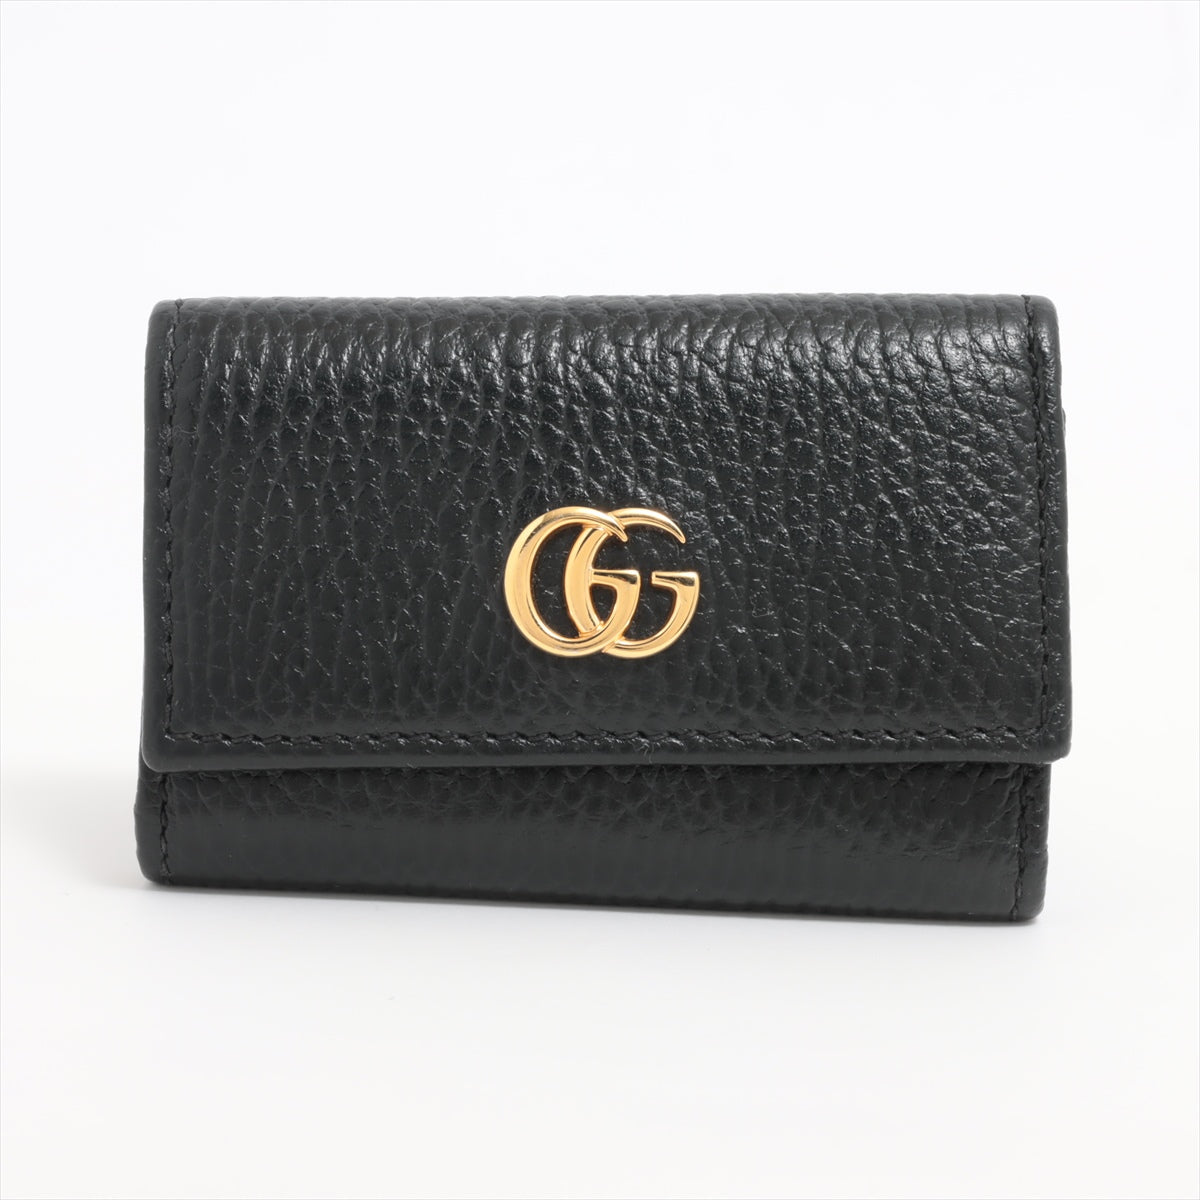 Gucci GG Marmont 456118 Leather Key case Black